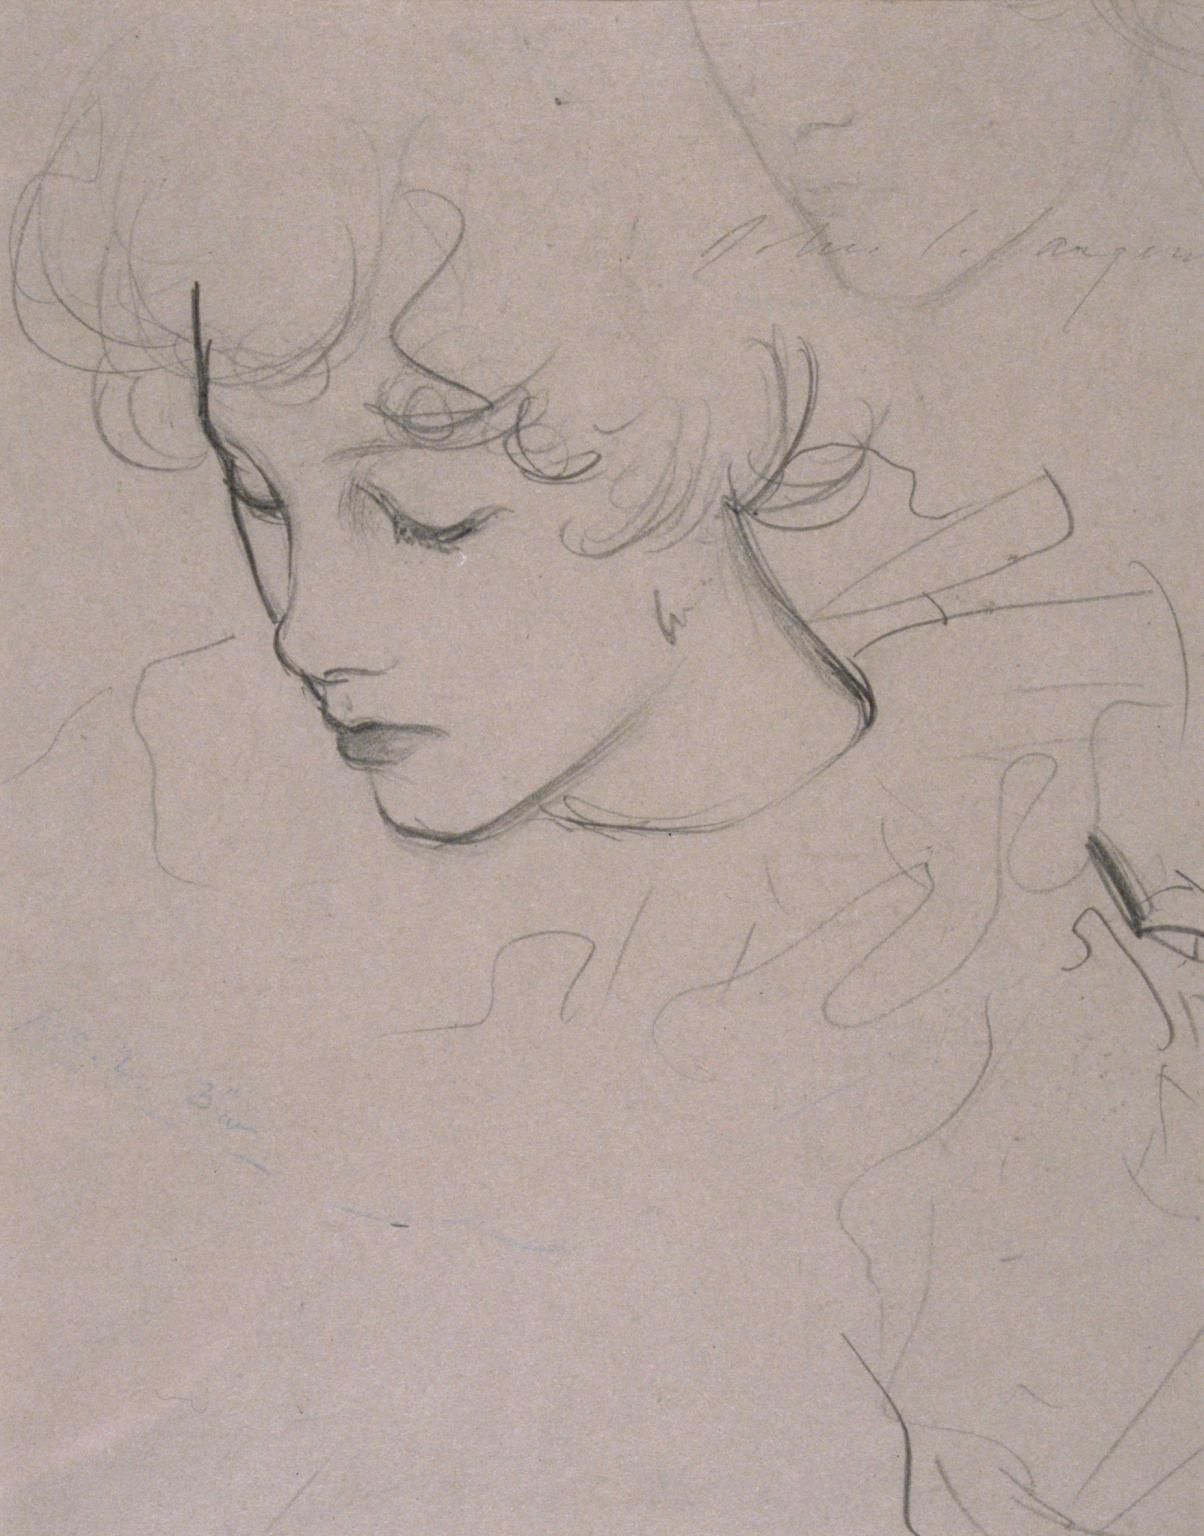 John Singer Sargent  Portrait of Ernest Schelling 18761939  Drawings  Online  The Morgan Library  Museum